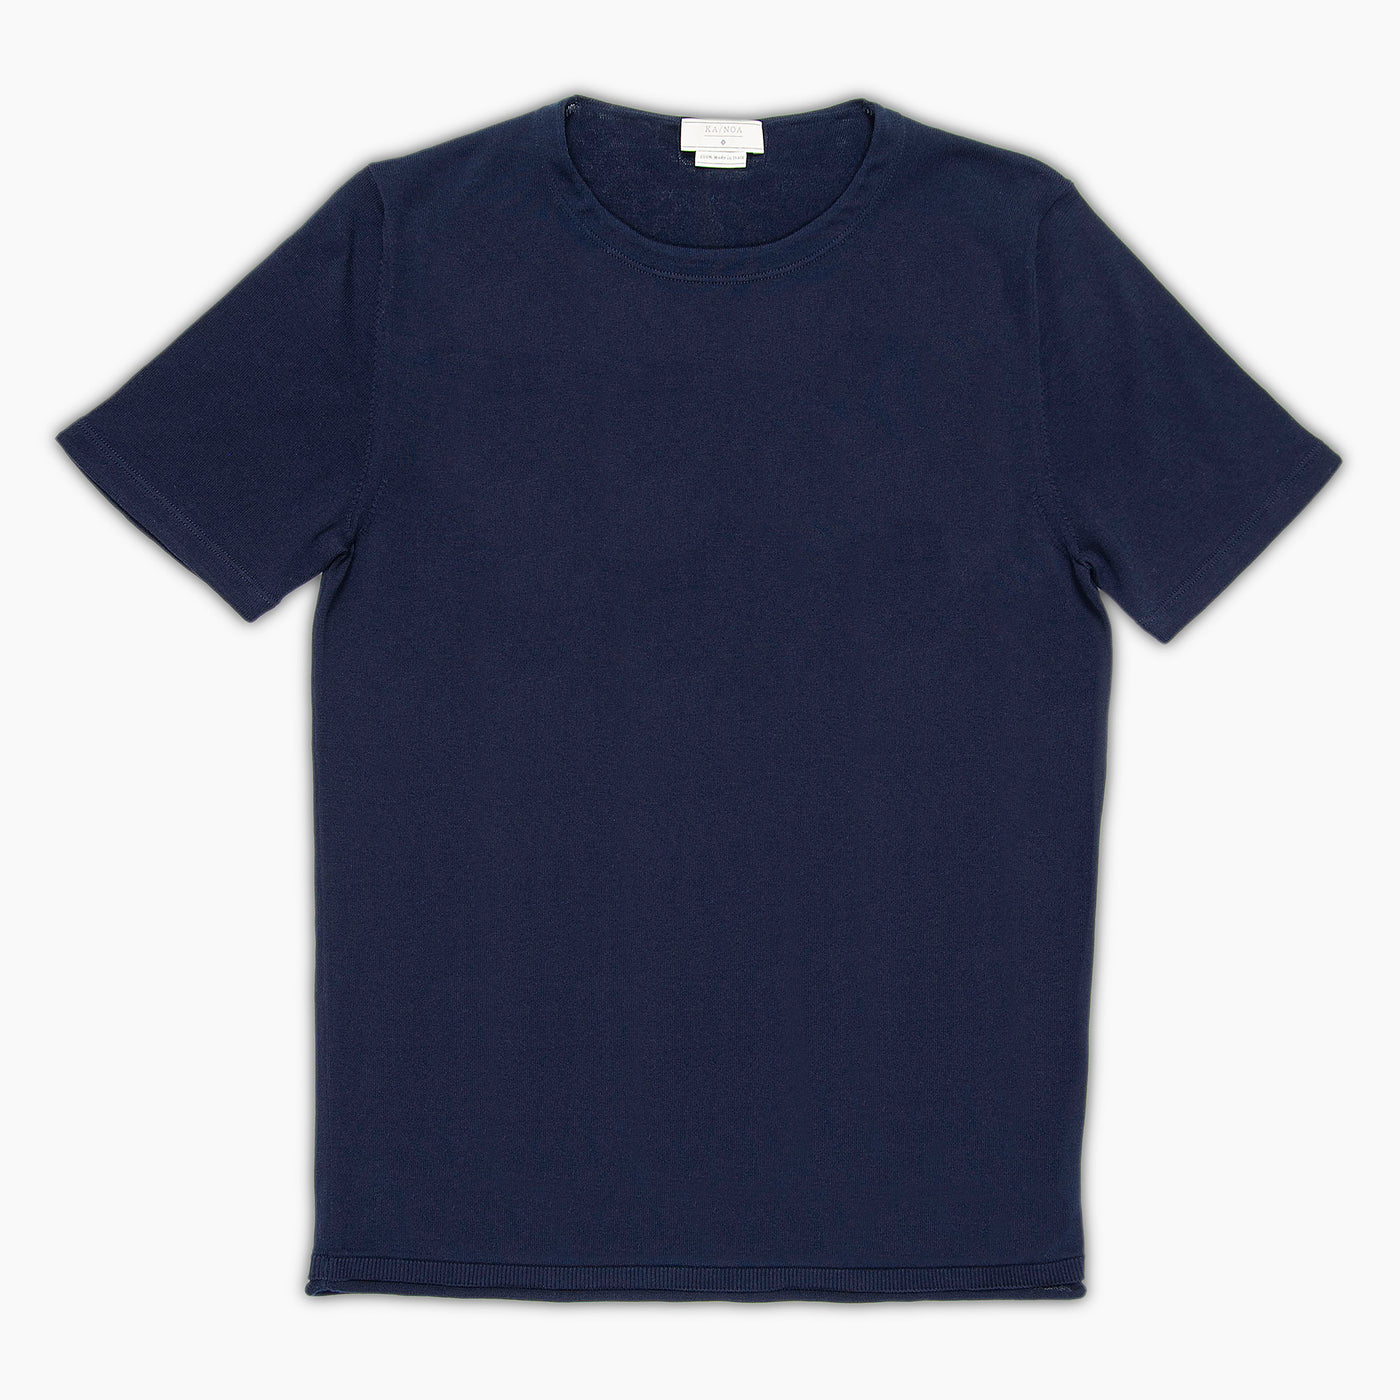 Richard short-sleeved knitted t-shirt in compact Egyptian cotton